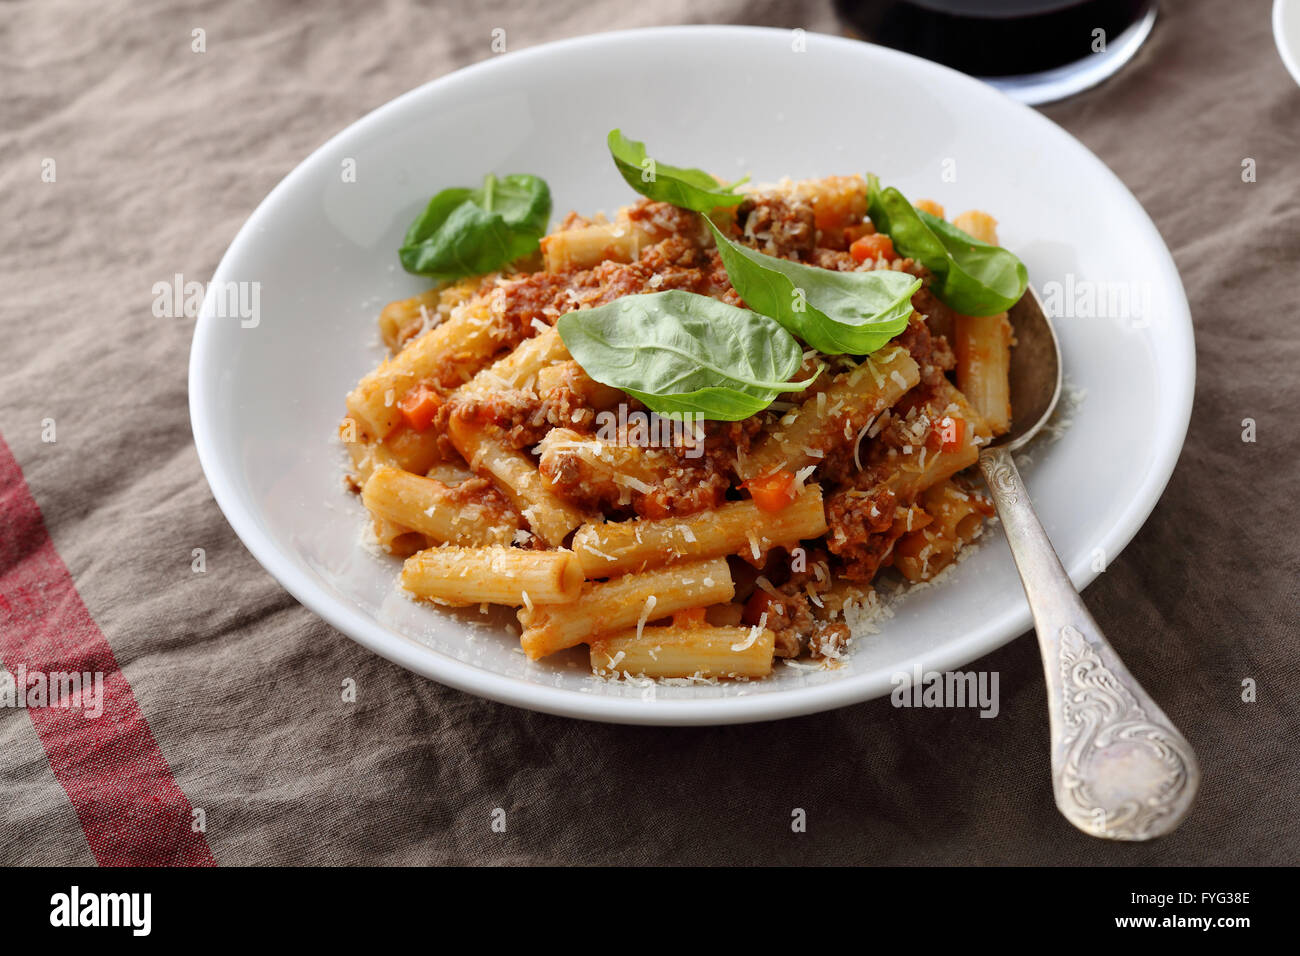 pasta with bolognese sauce and cheese, food close-up Stock Photo